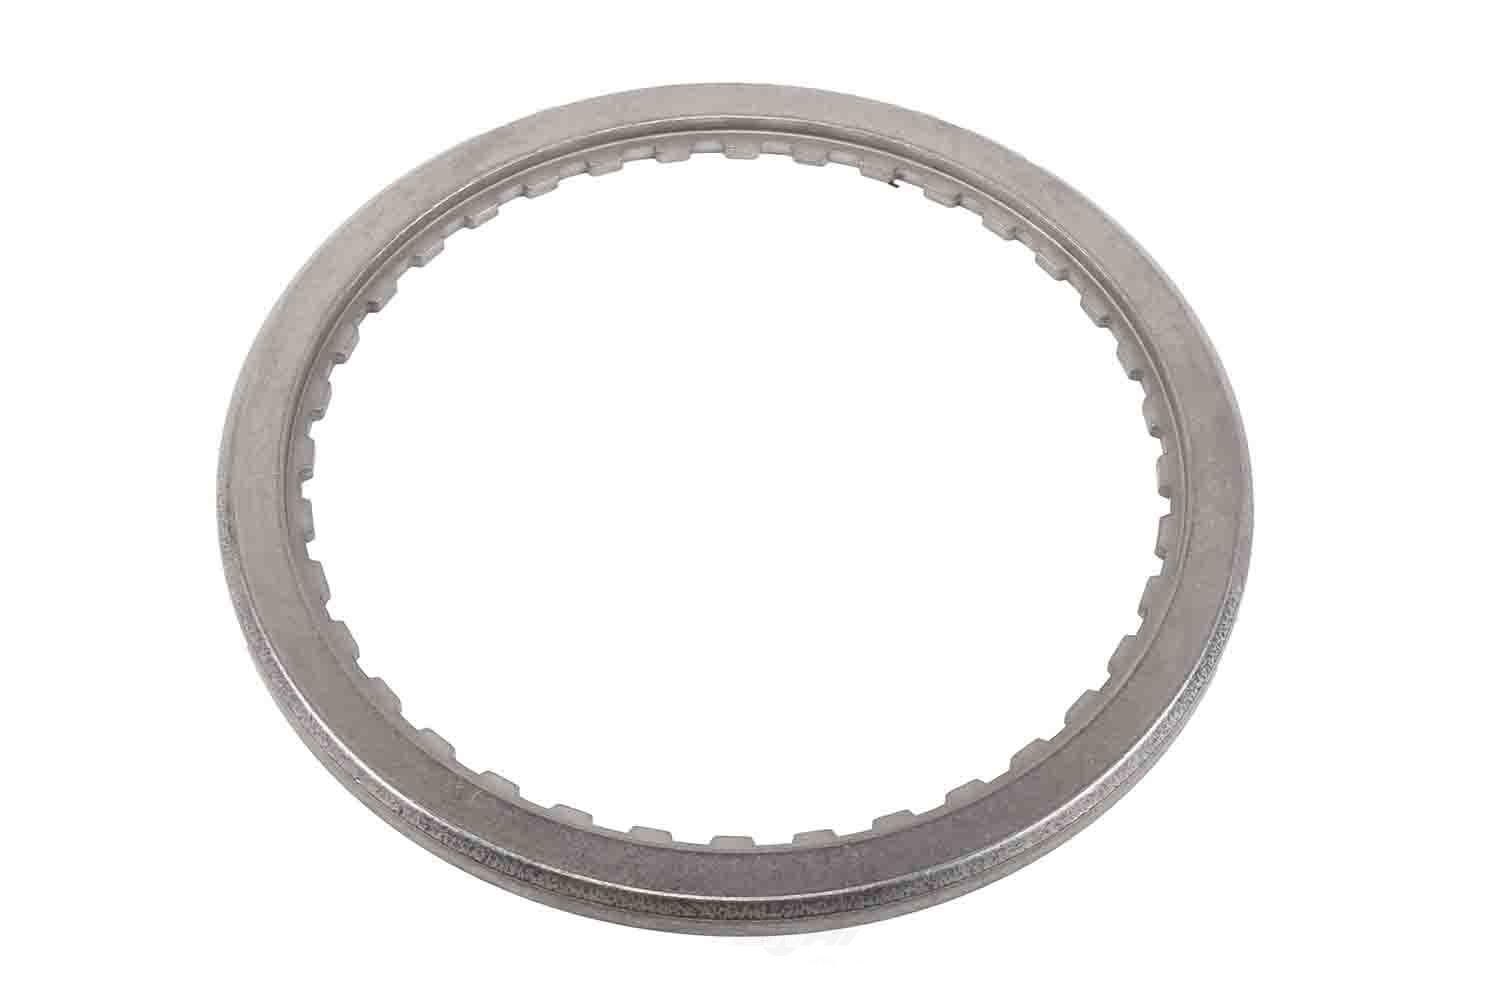 GM GENUINE PARTS - Automatic Transmission Clutch Backing Plate - GMP 24236516